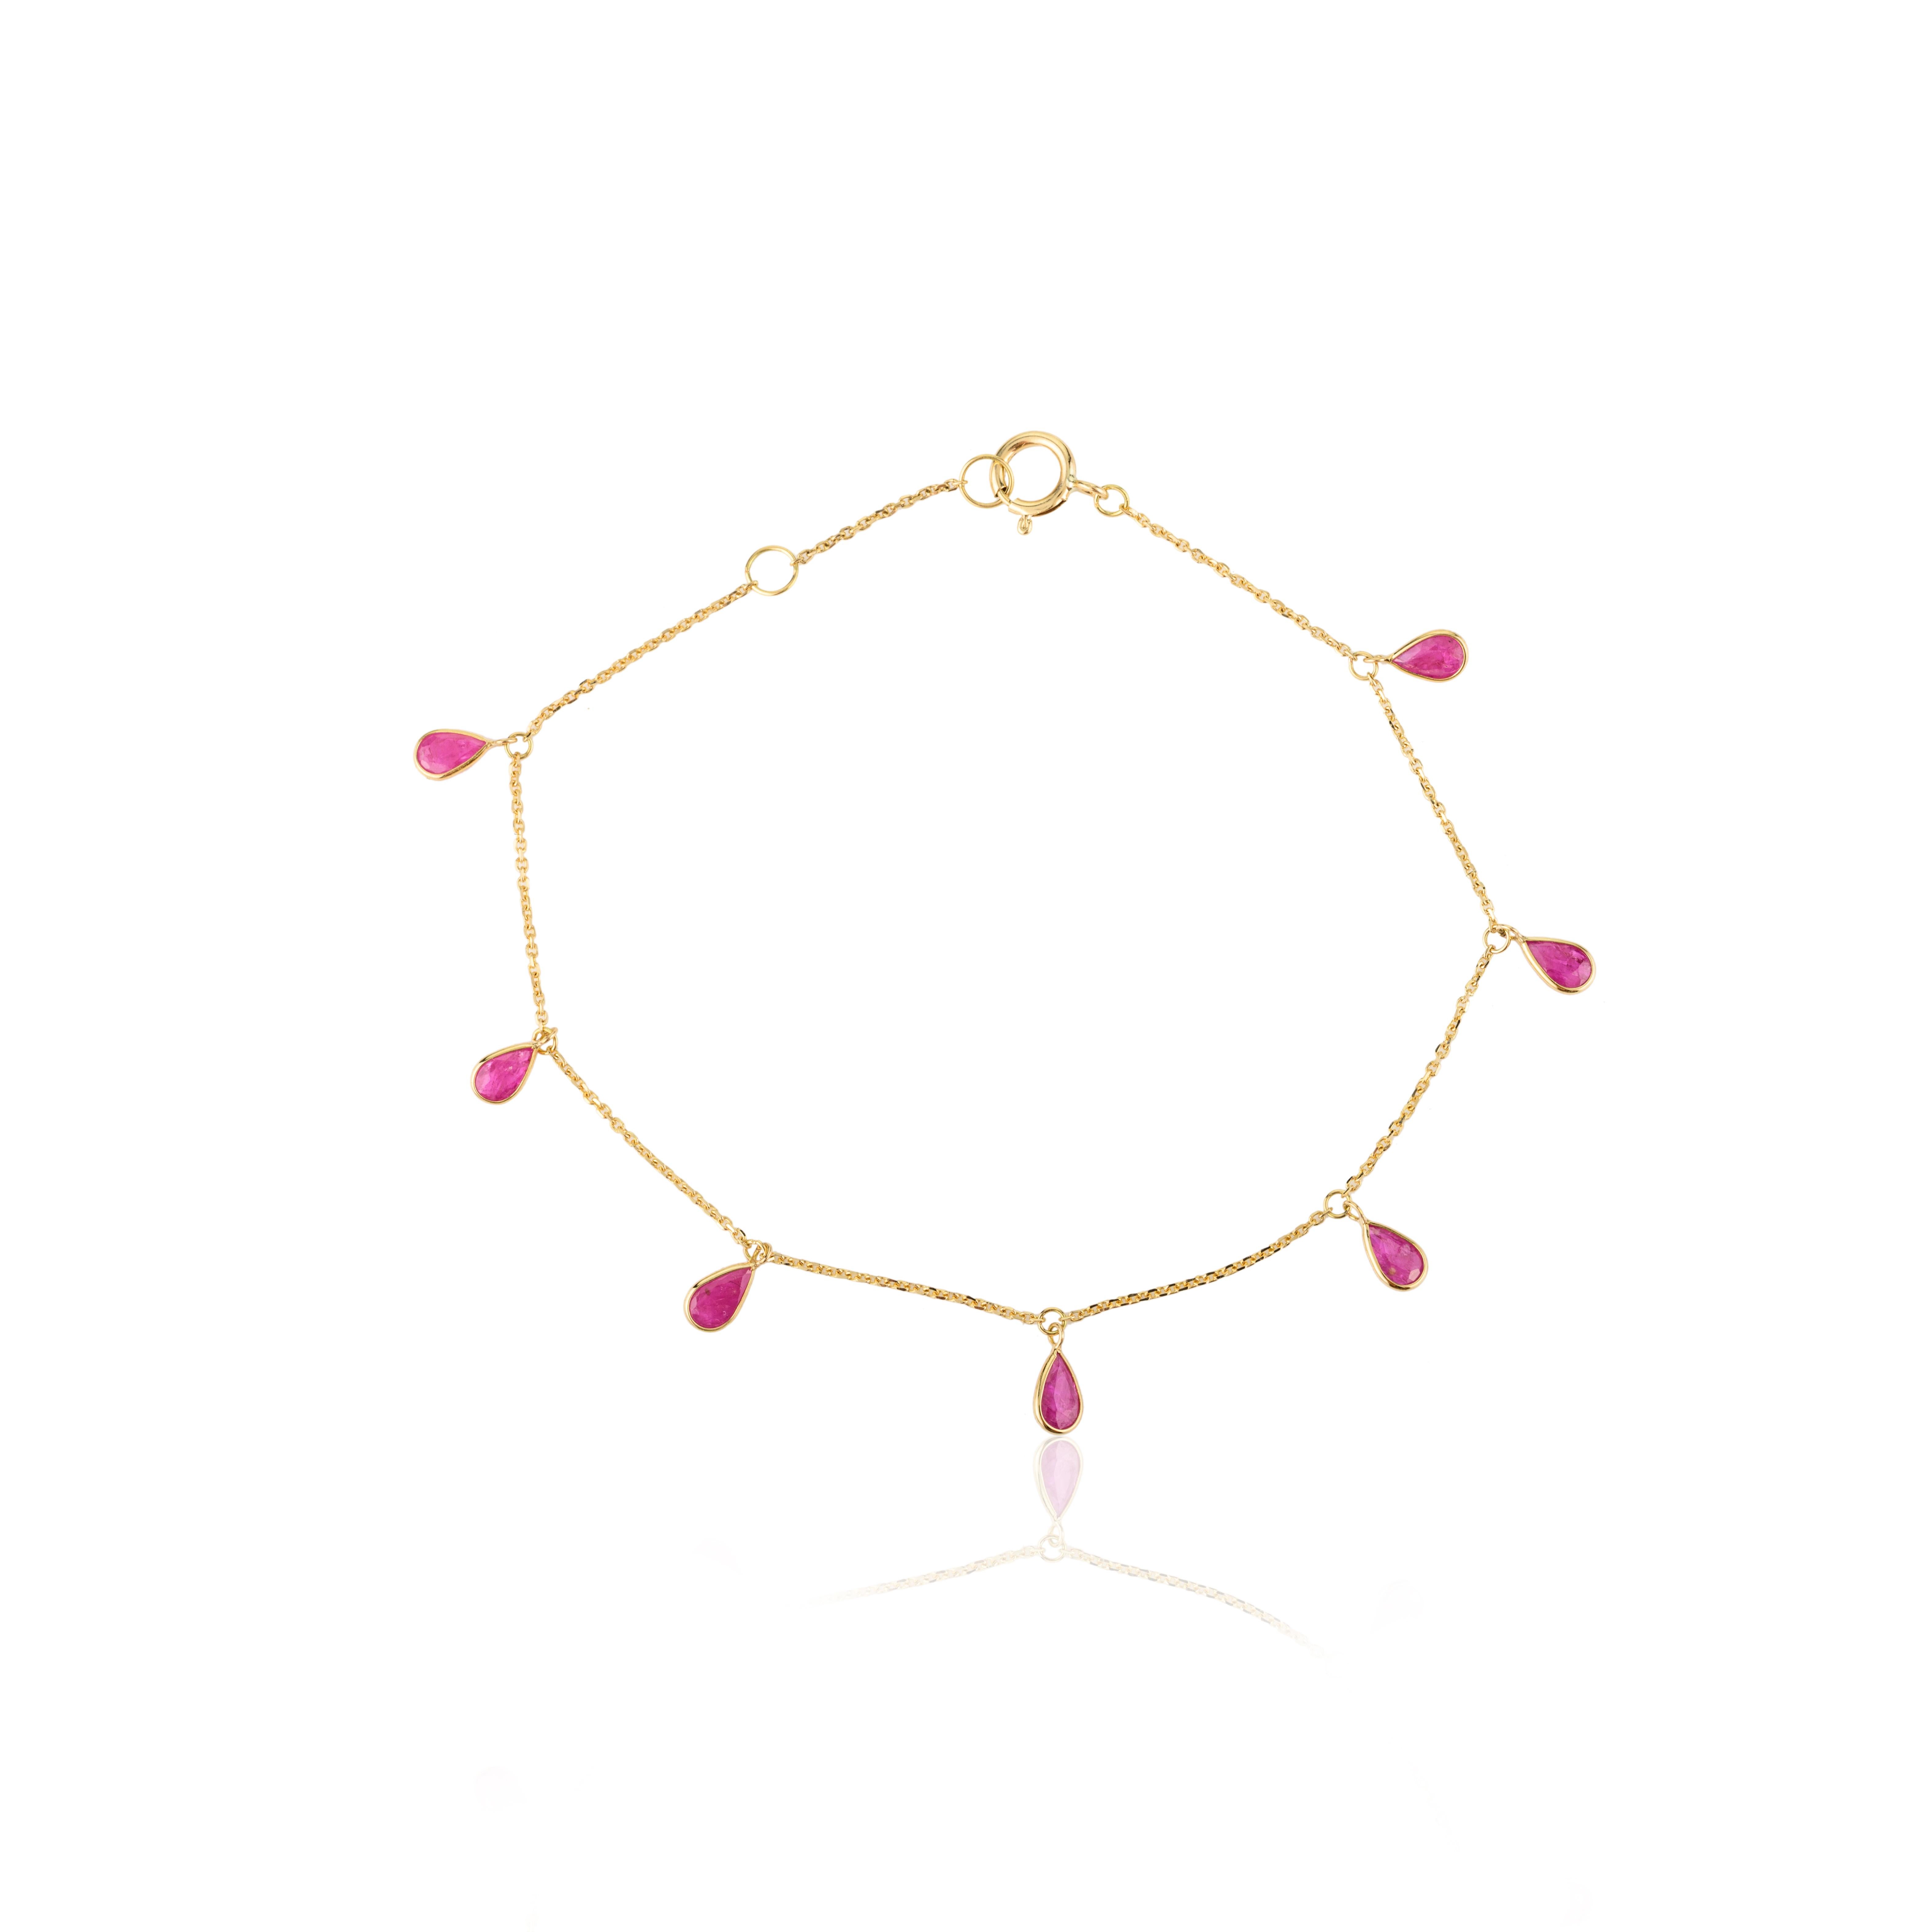 Women's Ruby Everyday Chain Bracelet for Her Handcrafted in 18k Yellow Gold